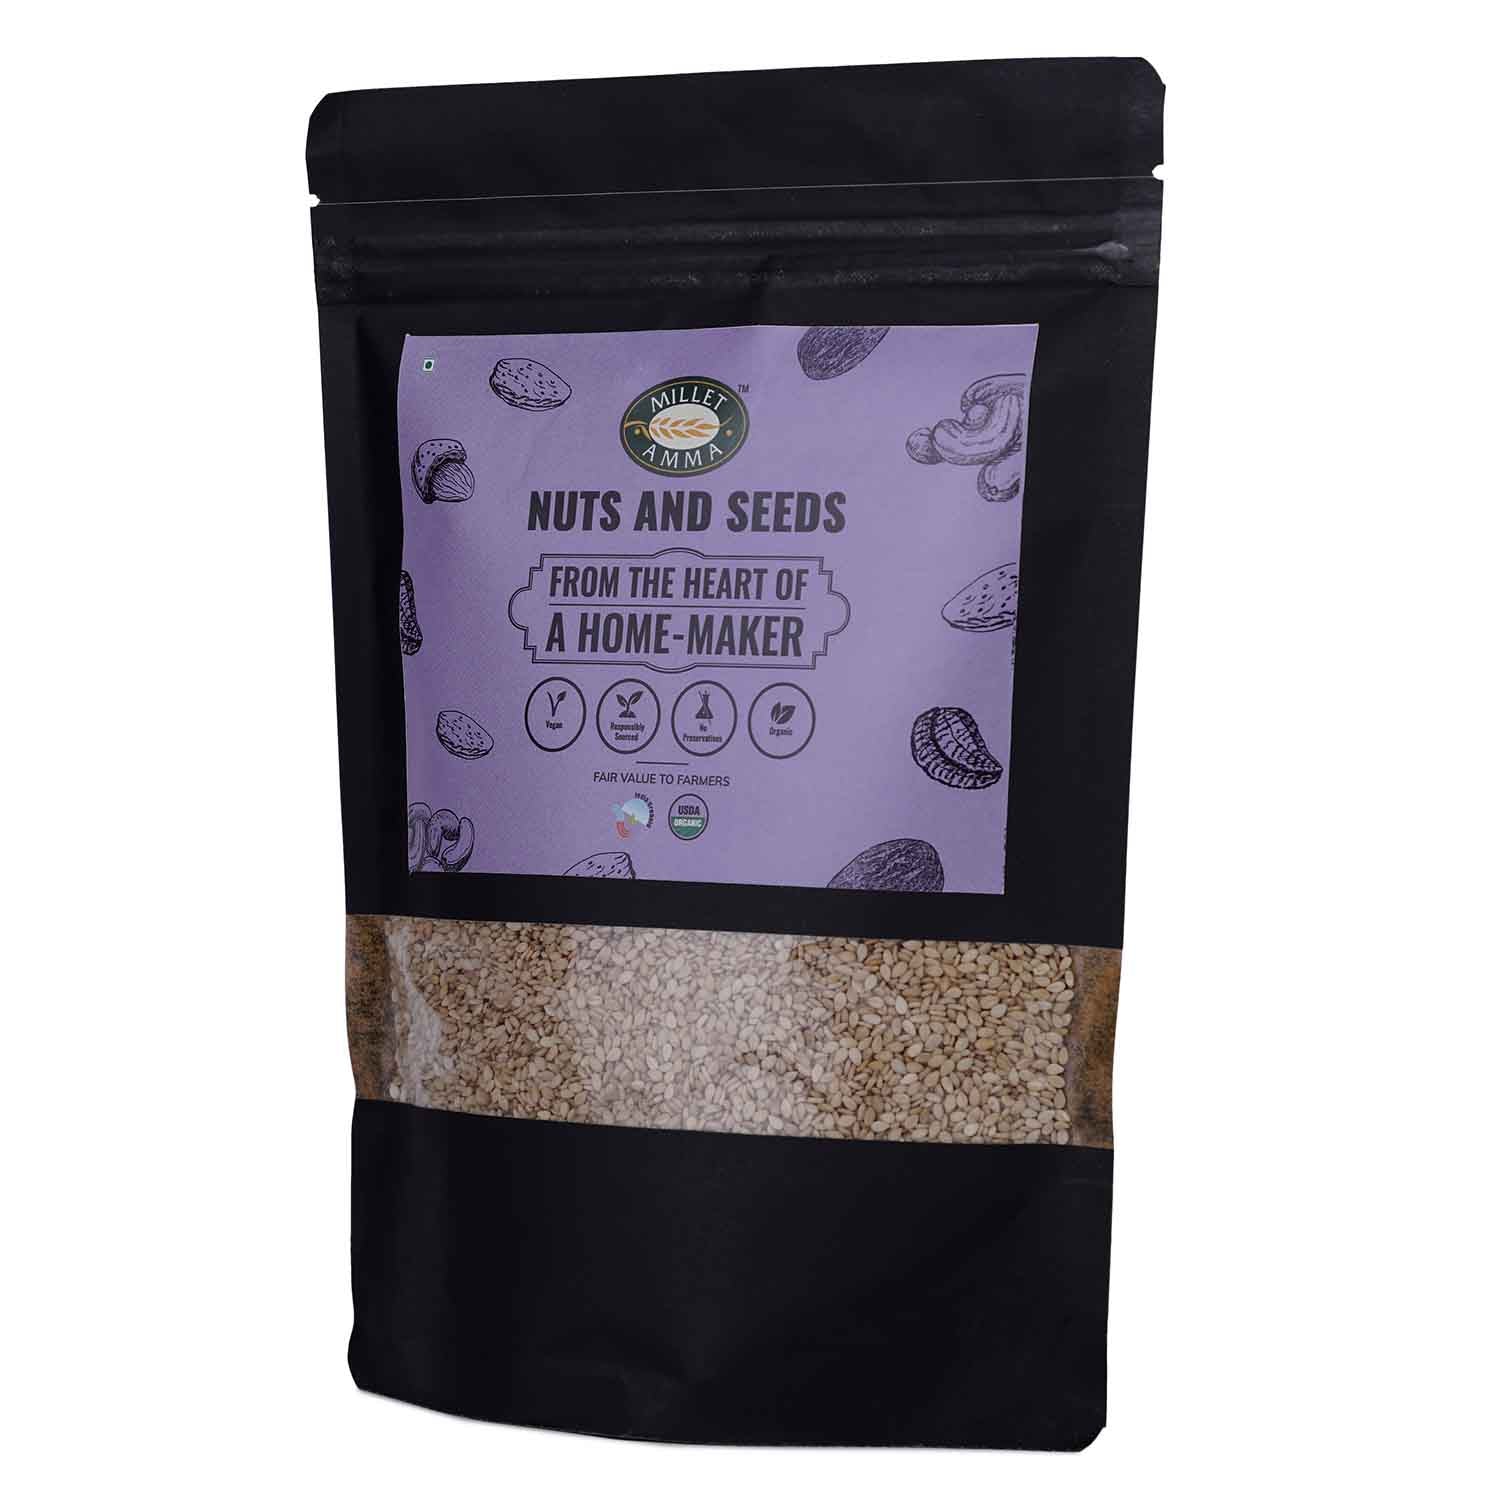 Milletamma’s white Til - Sesame Seedshas rich in magnesium that acts as an anti-cancer in our body.   It has fibre that helps to prevent stomach related issues like constipation.  It has an antioxidants and anti-inflammatory properties that help to control our diet.